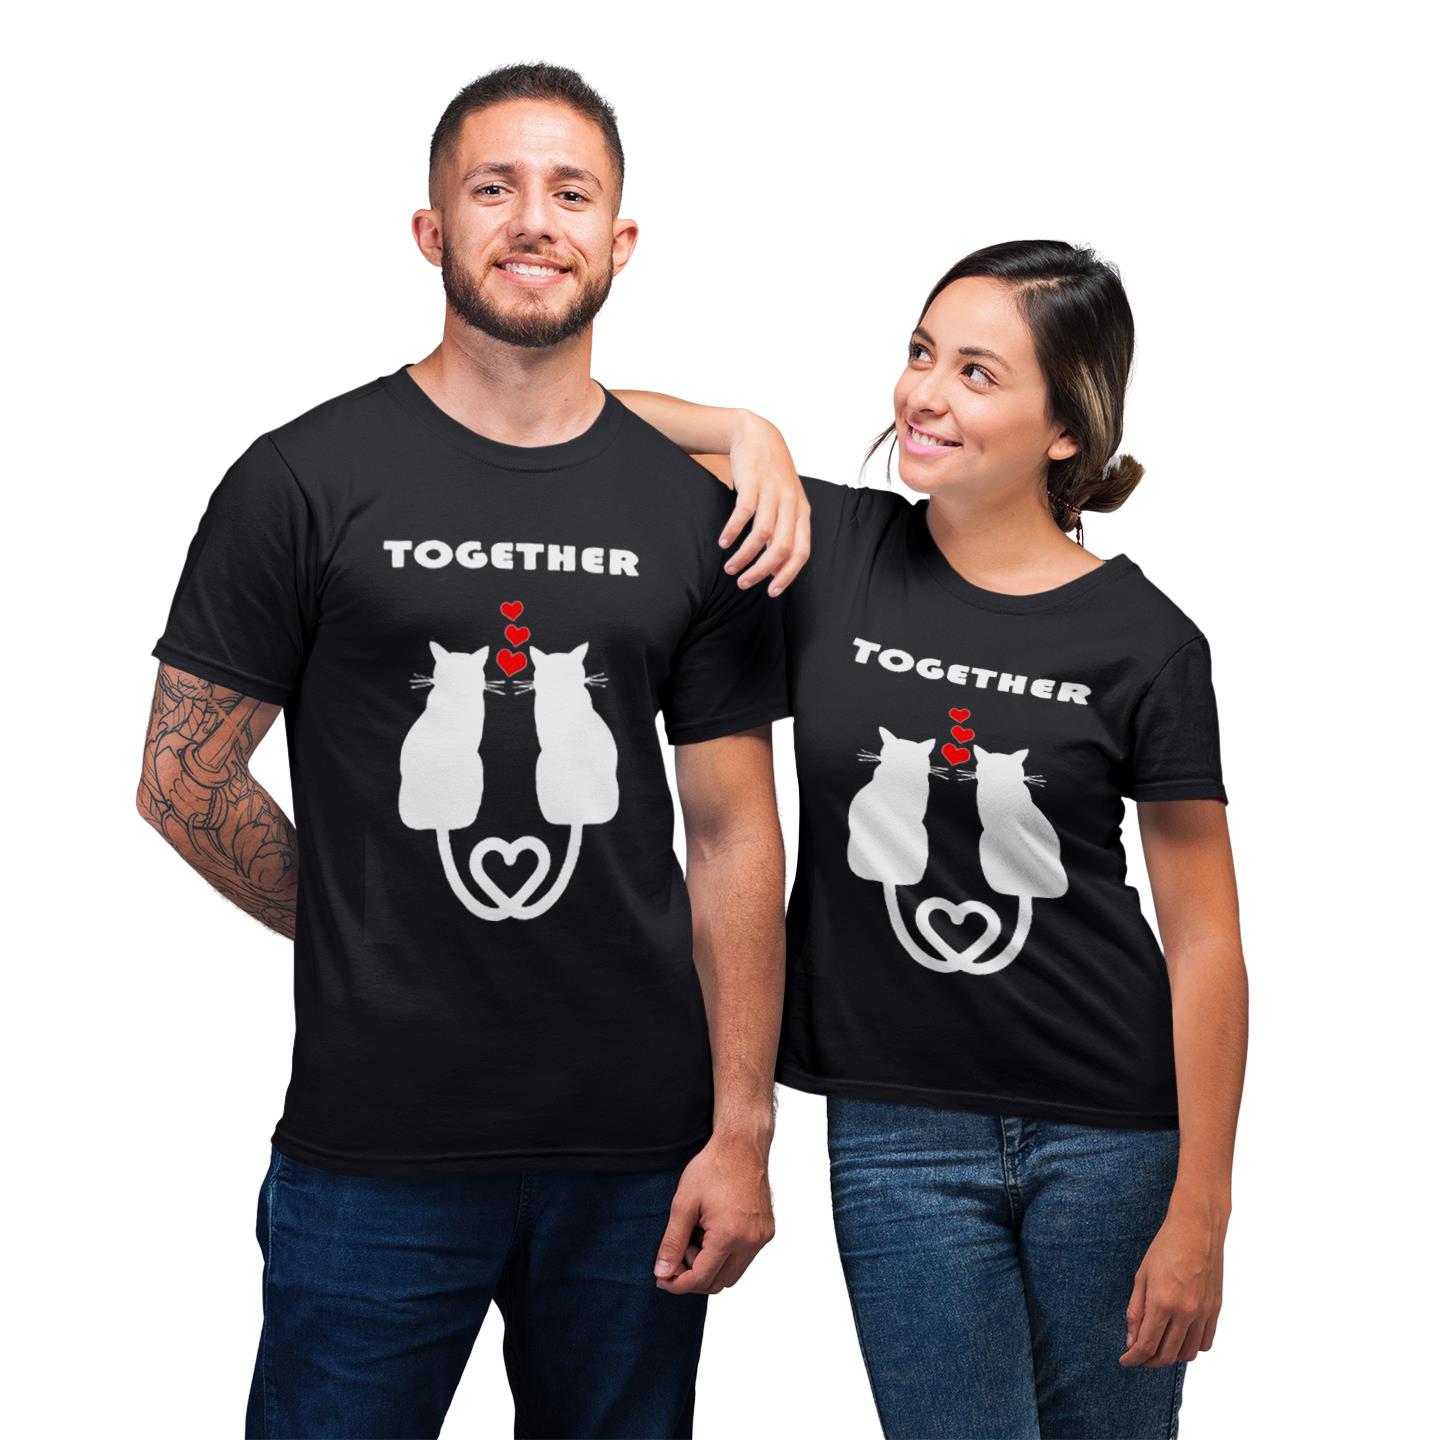 Together 2 Cat Heart Funny Shirt For Couple Lover Matching T-shirt